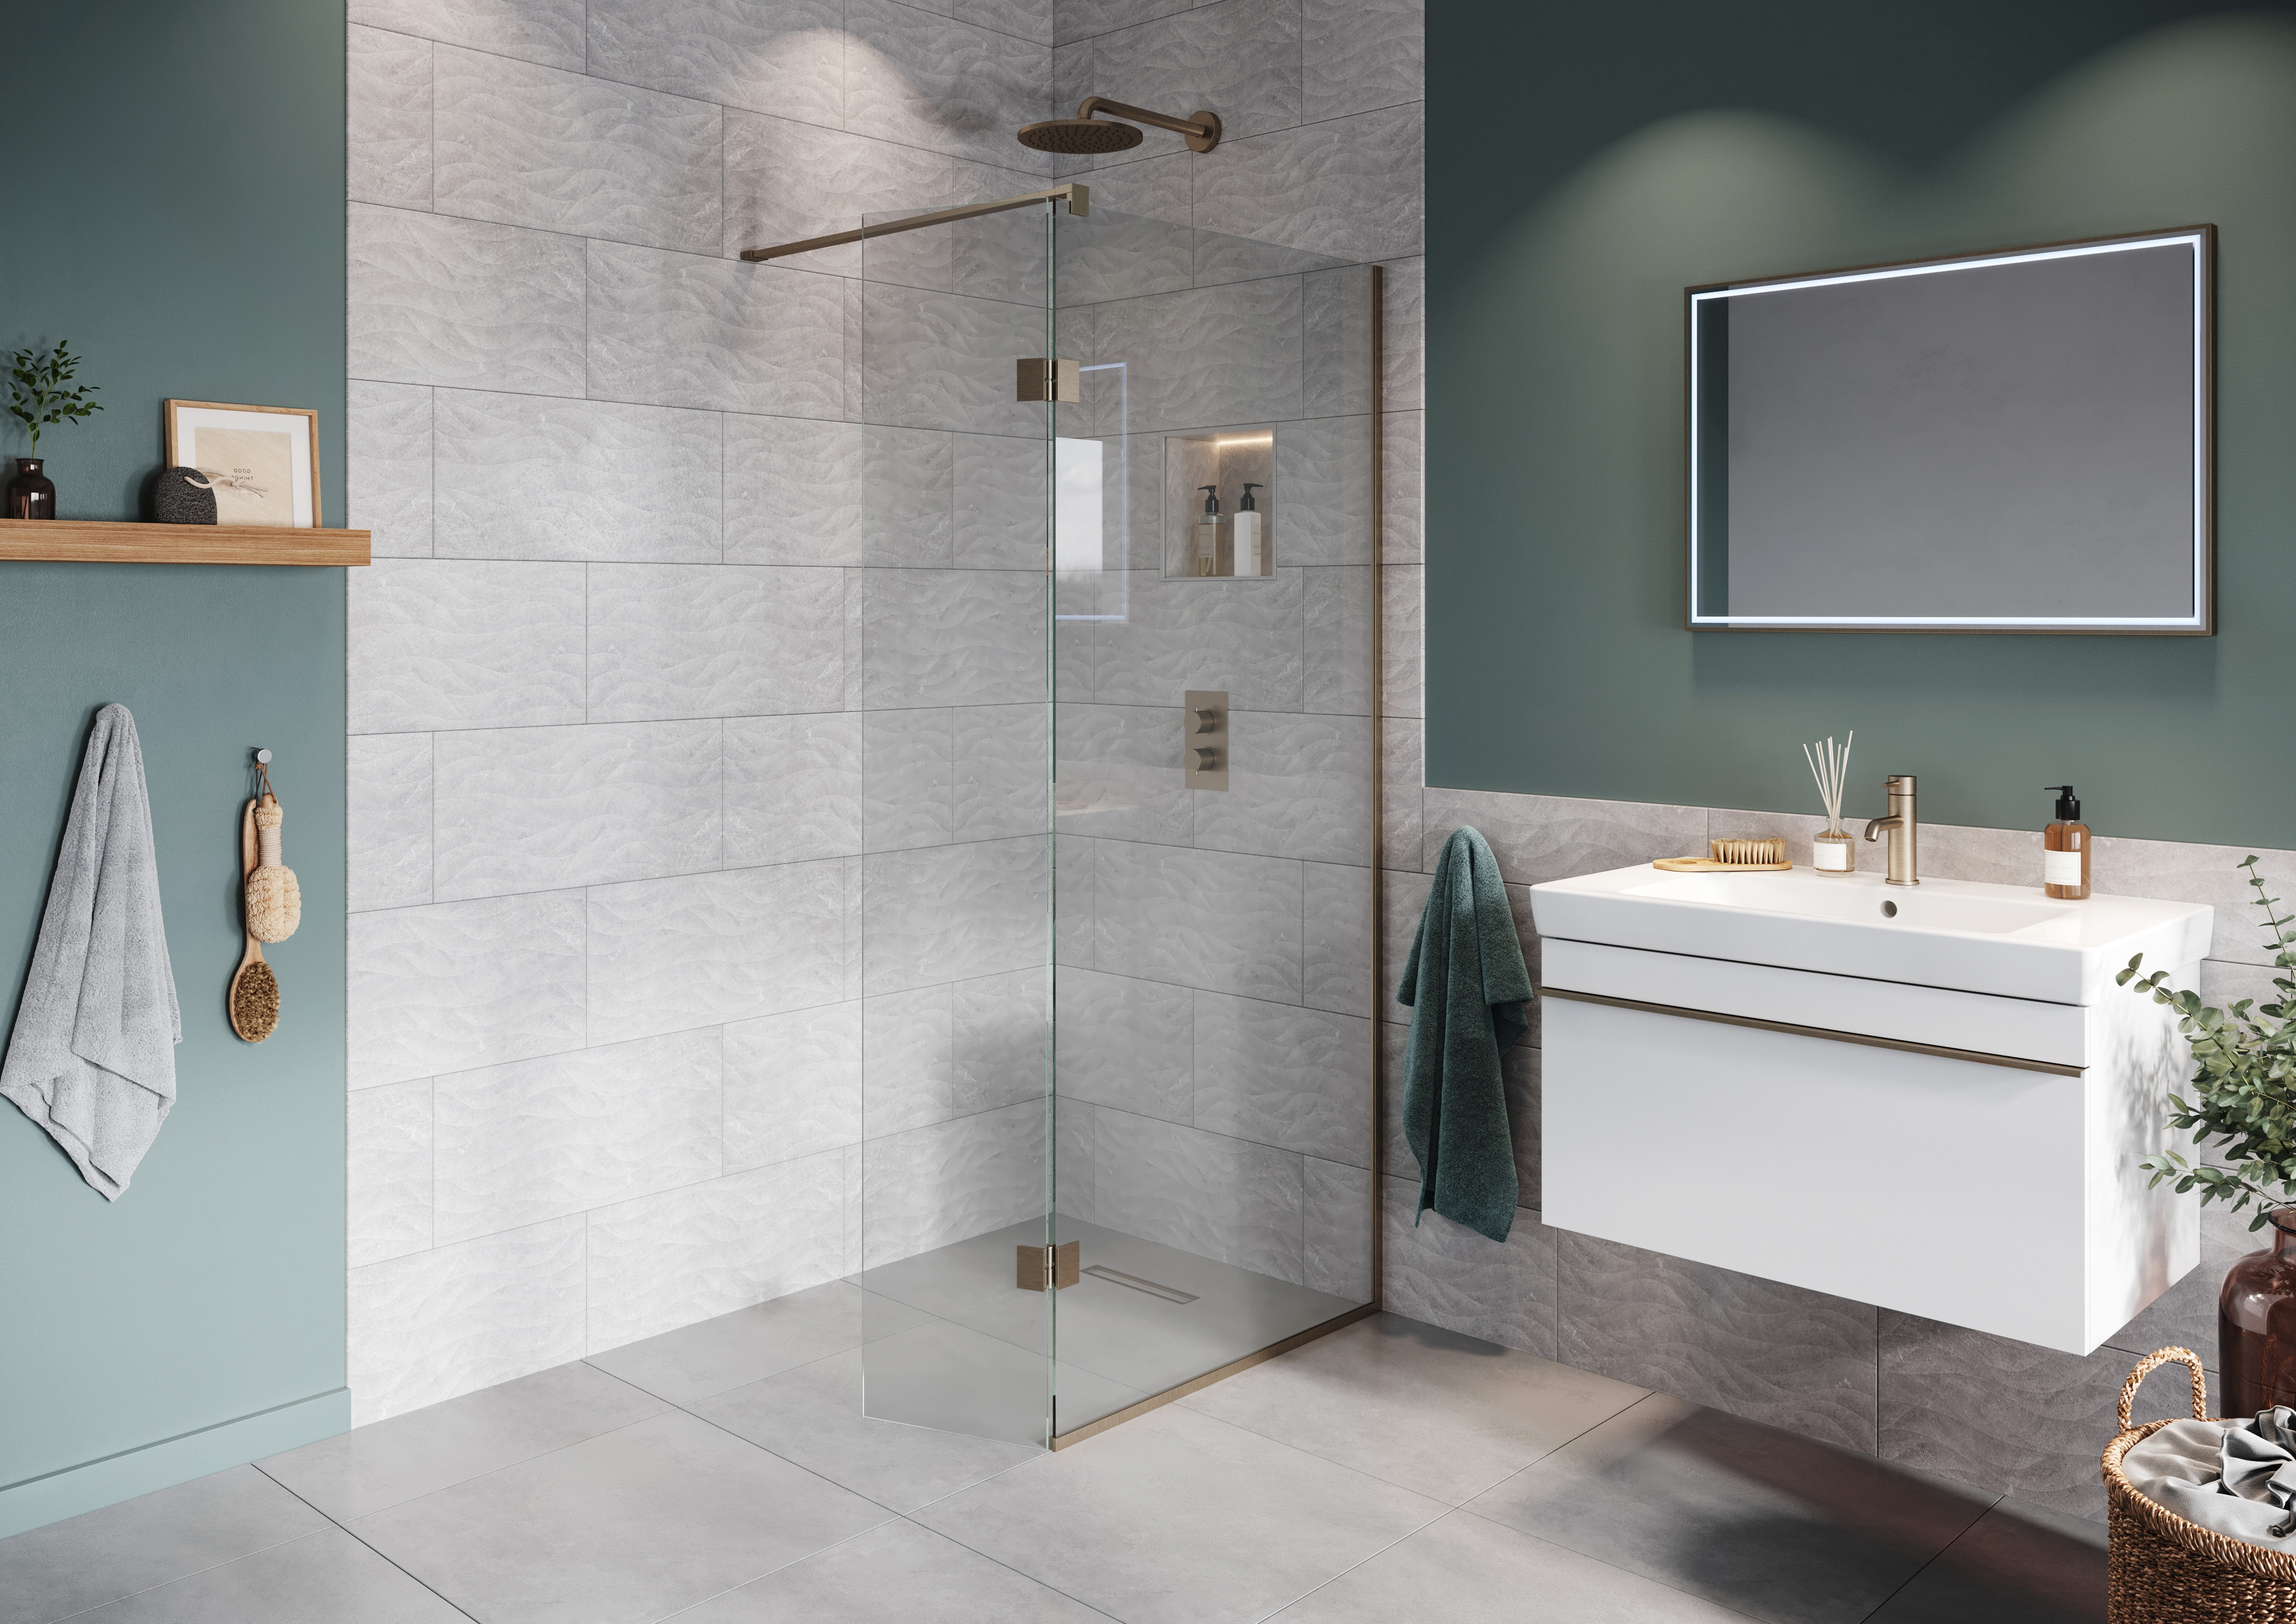 Hadleigh 8mm Brushed Nickel 900mm Frameless Wetroom Screen with Wall Arm & 350mm Pivot Panel